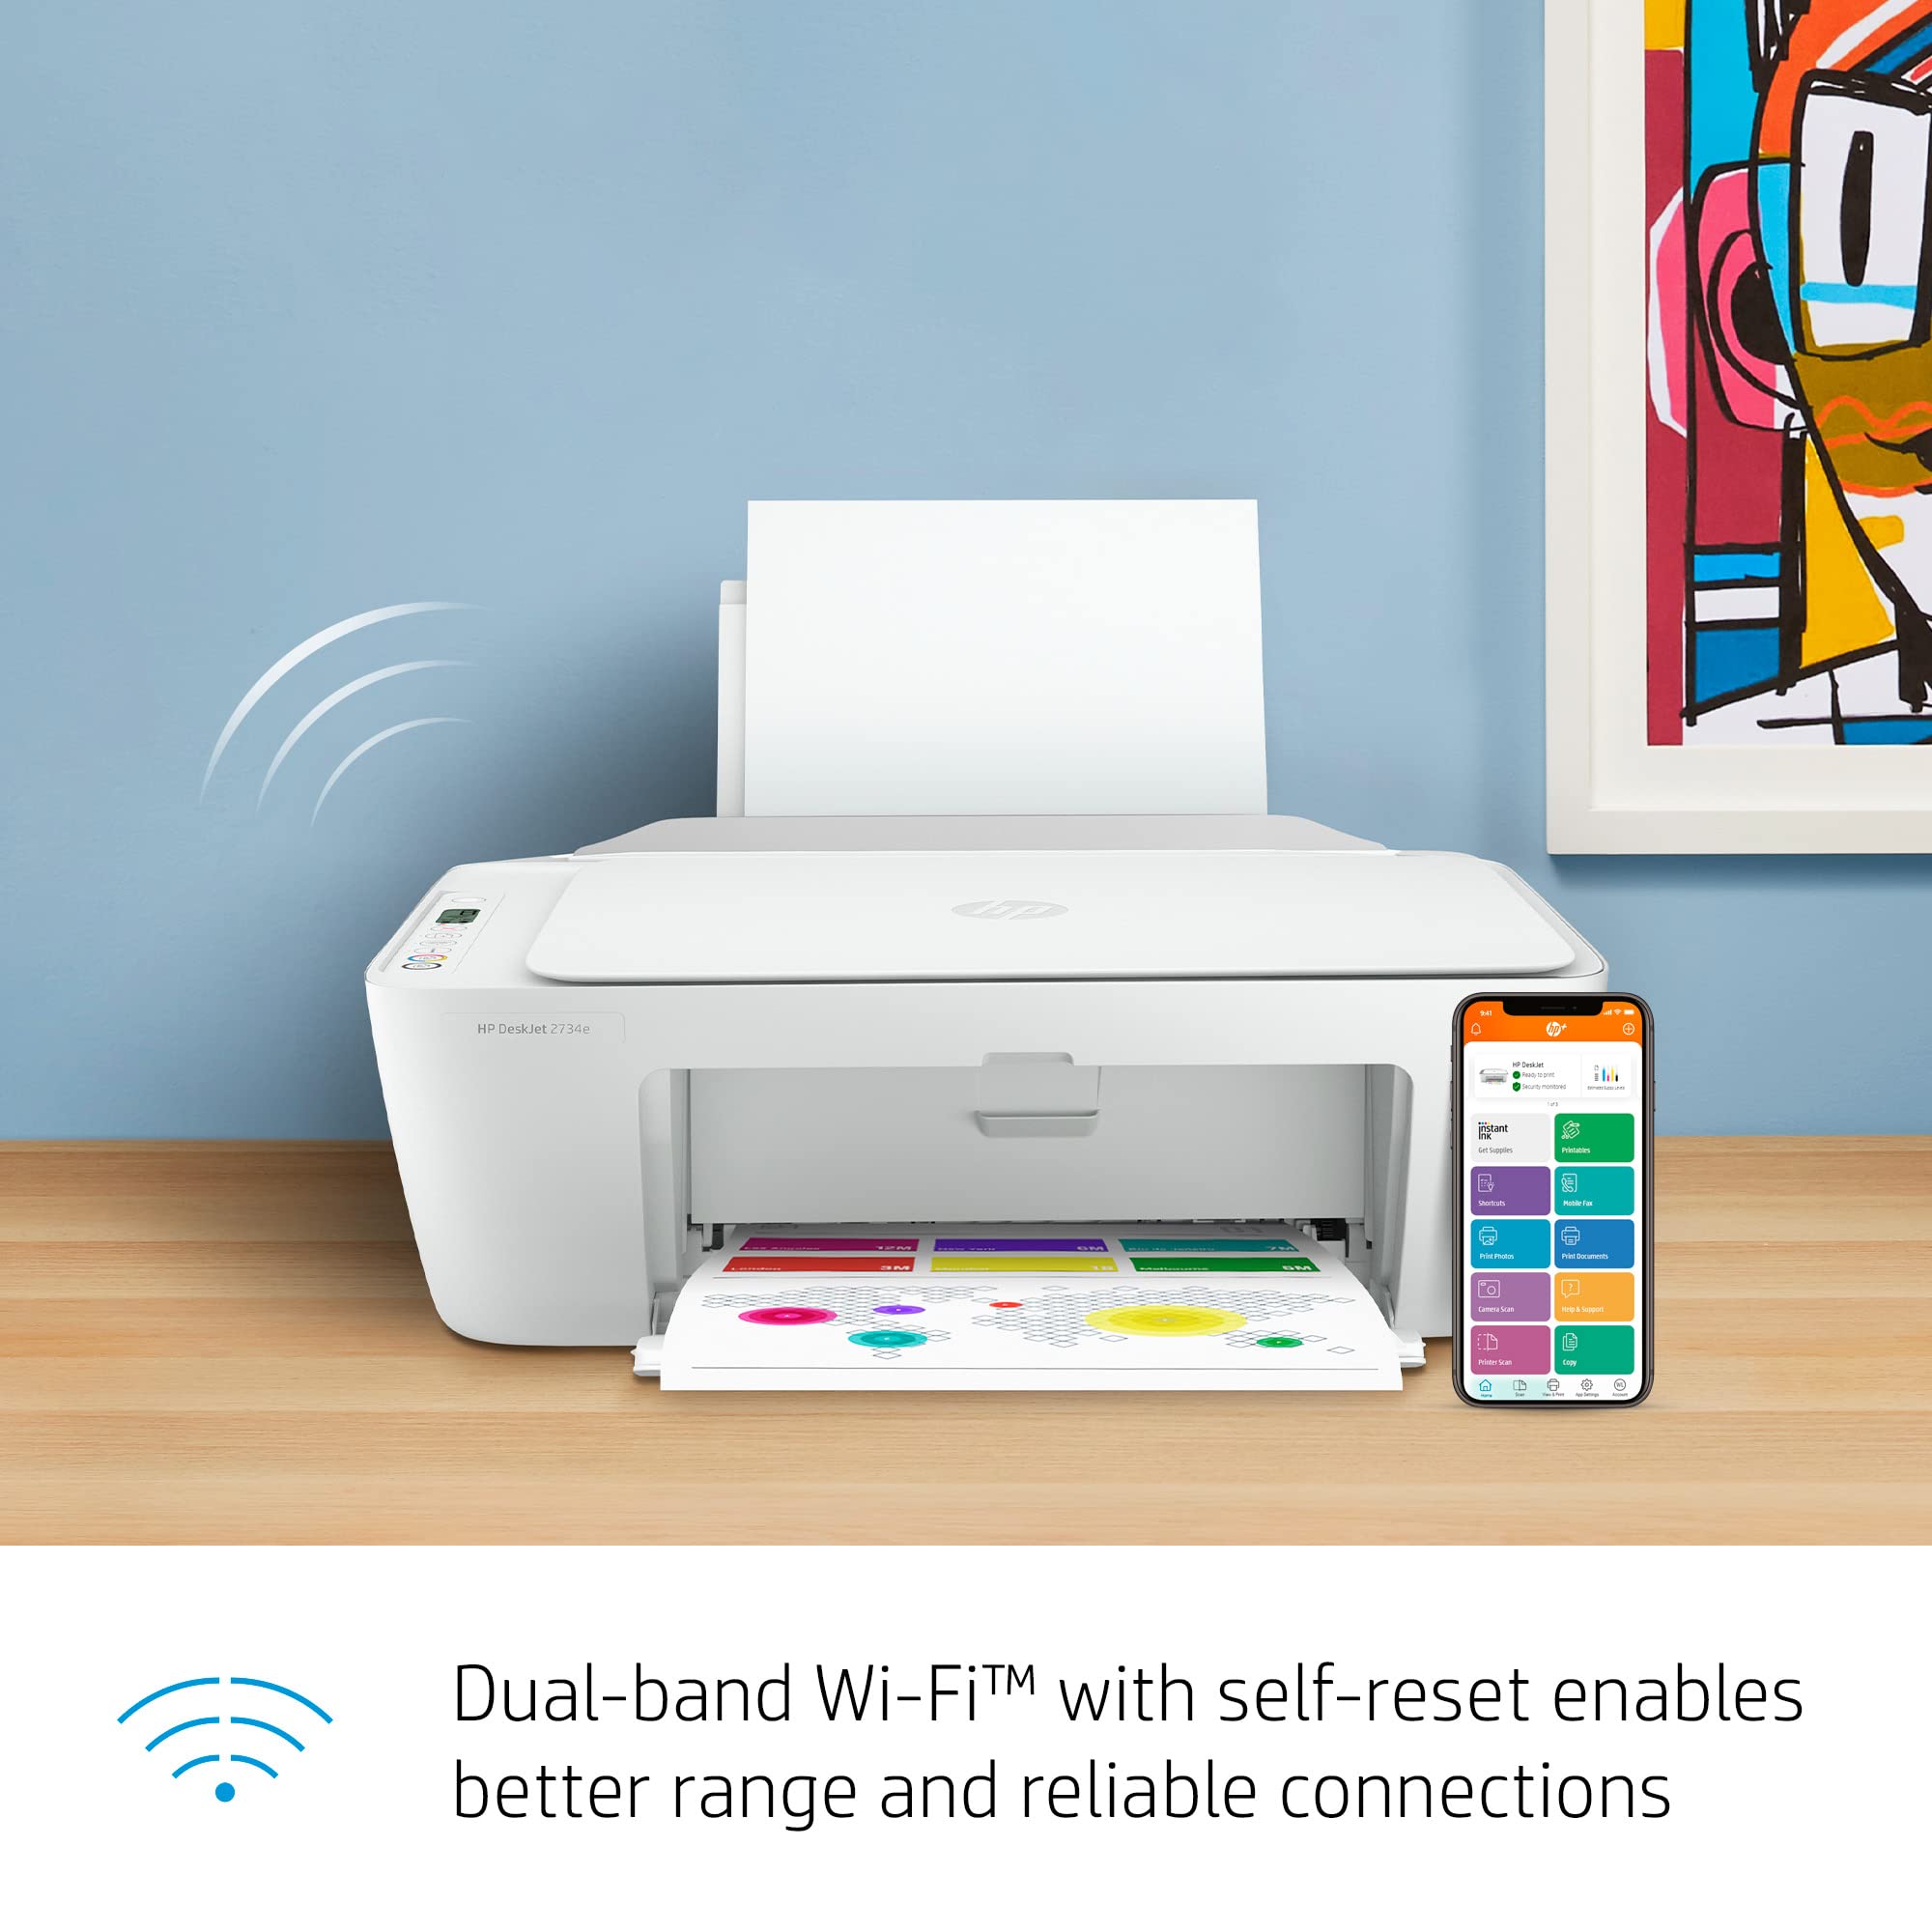 HP DeskJet 2734e Wireless Color All-in-One Printer with 3 Months Free Ink (26K72A) $39.99